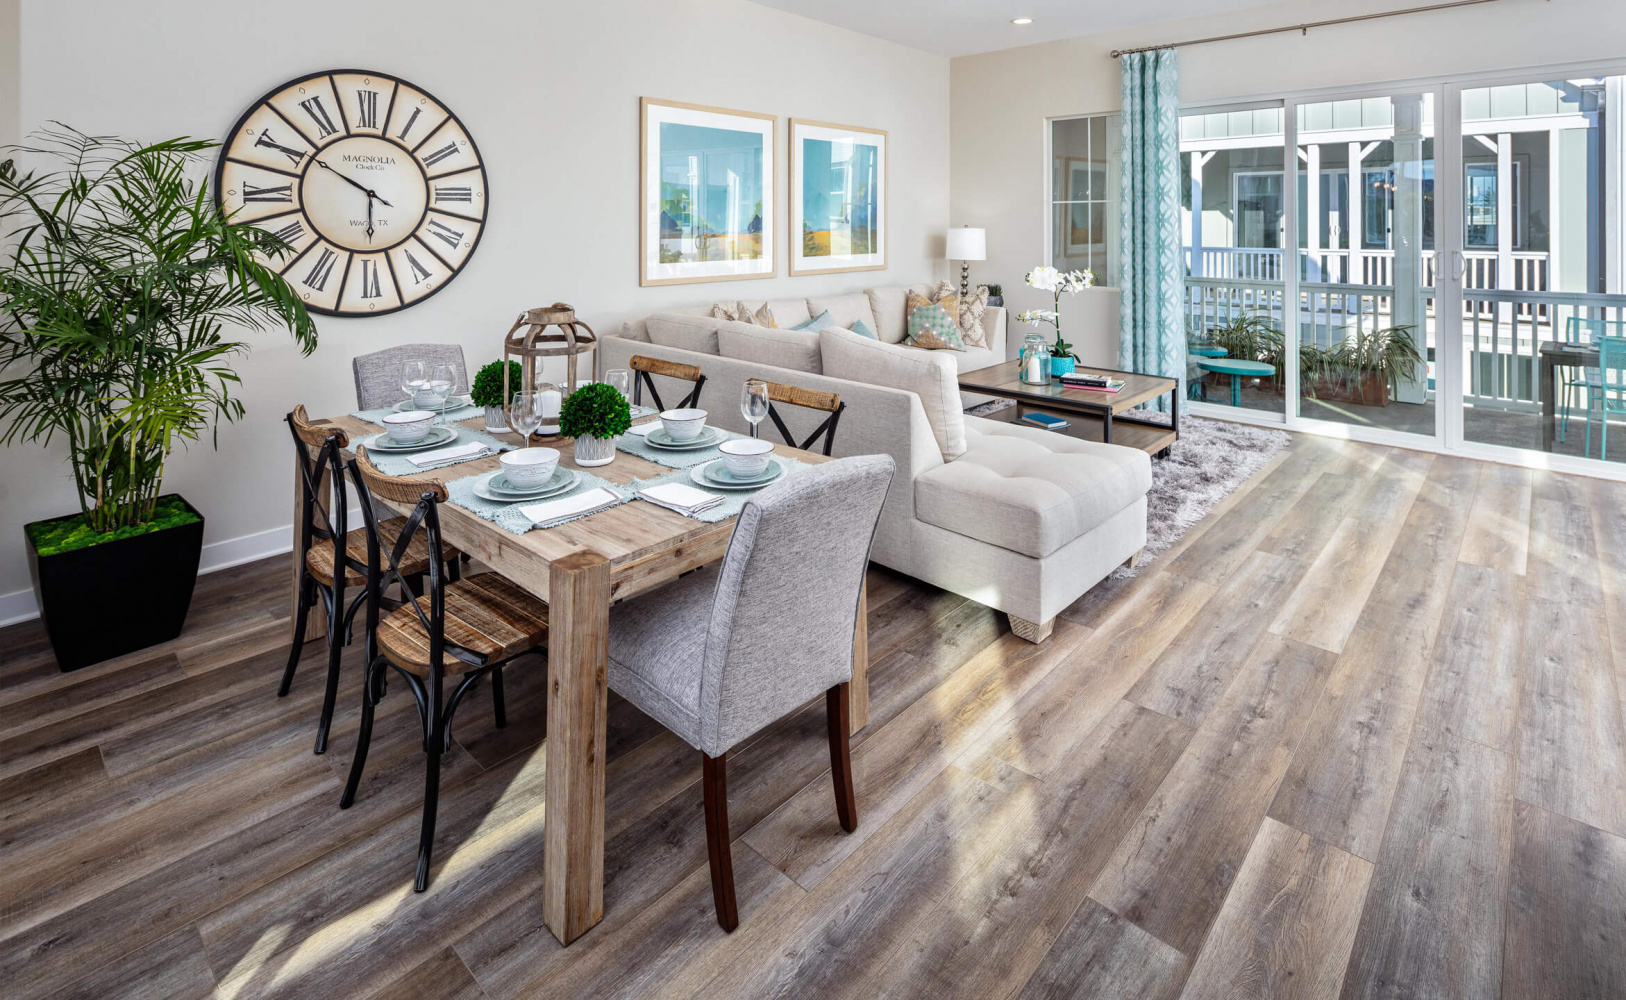 NewHeights-NewHomes-WestHills-Plan2-DiningRoom